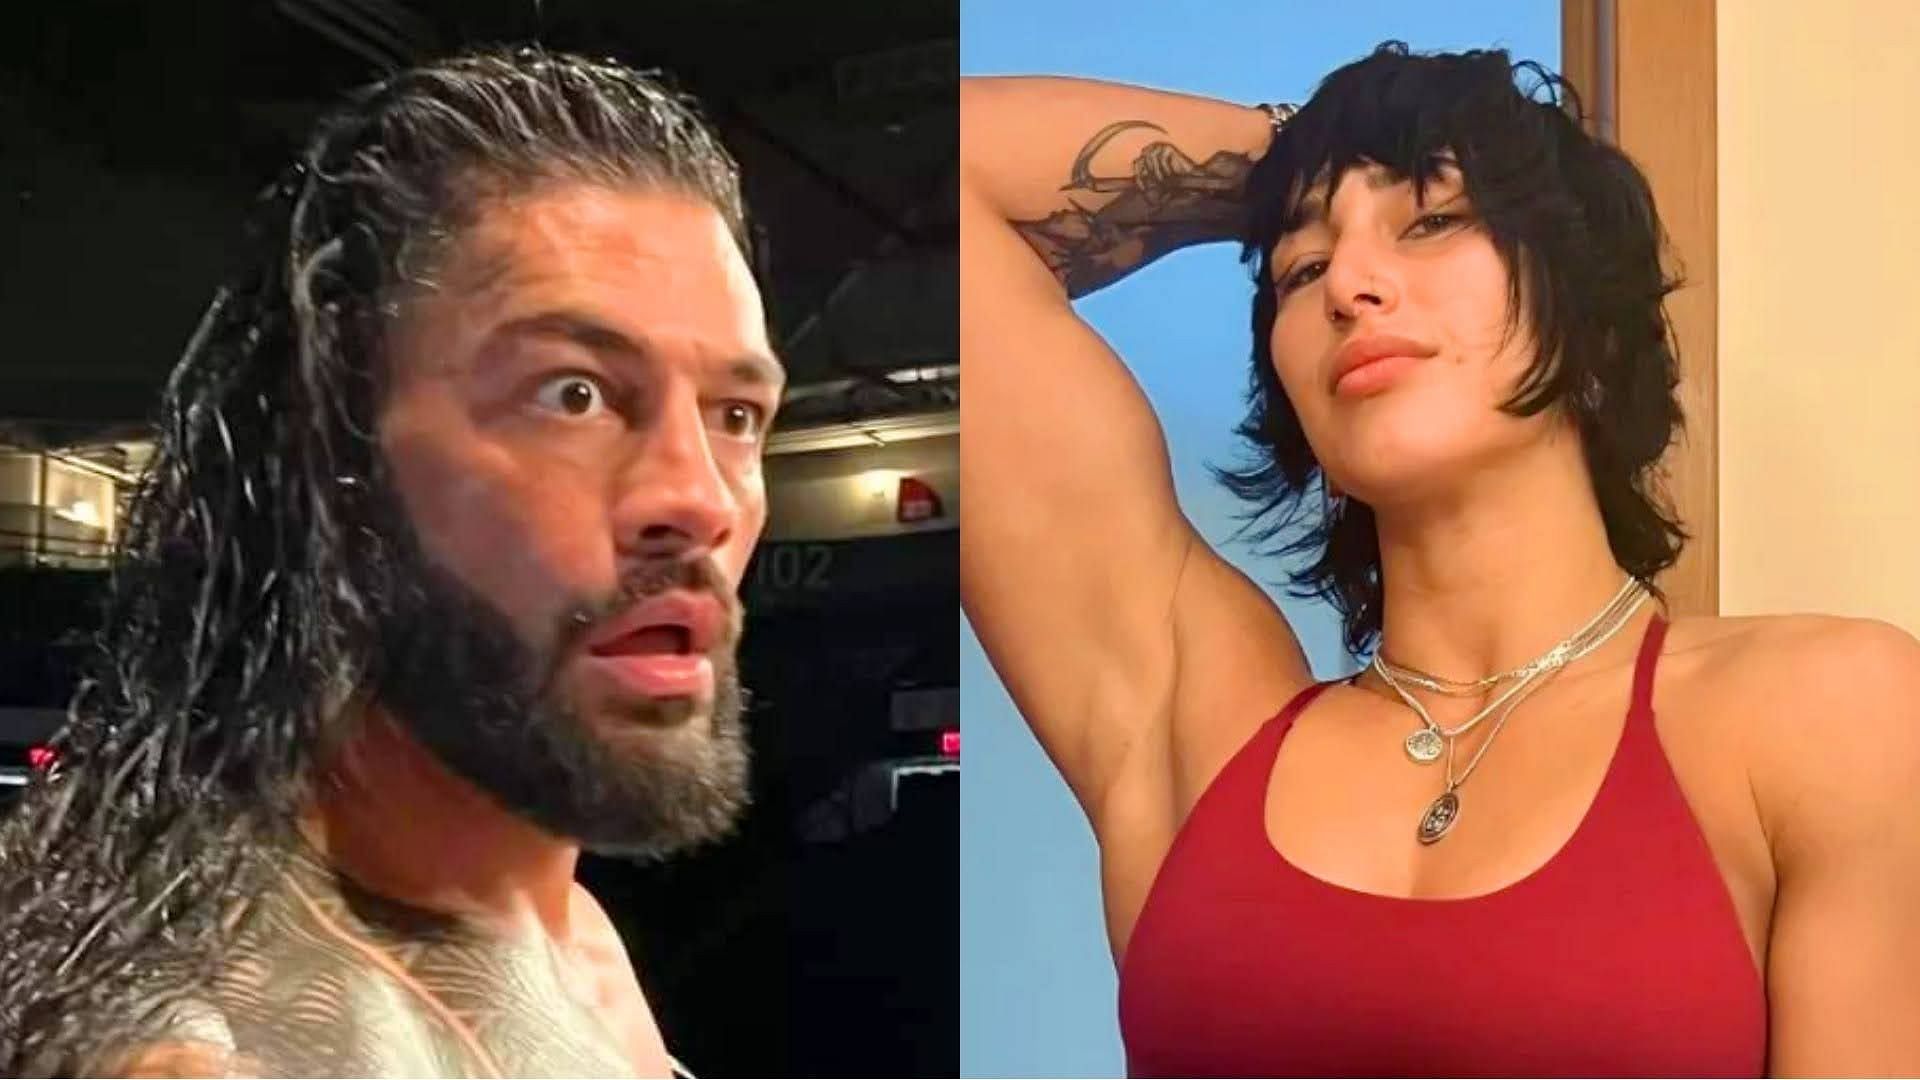 Roman Reigns (left) and Rhea Ripley (right) are extremely popular WWE Superstars